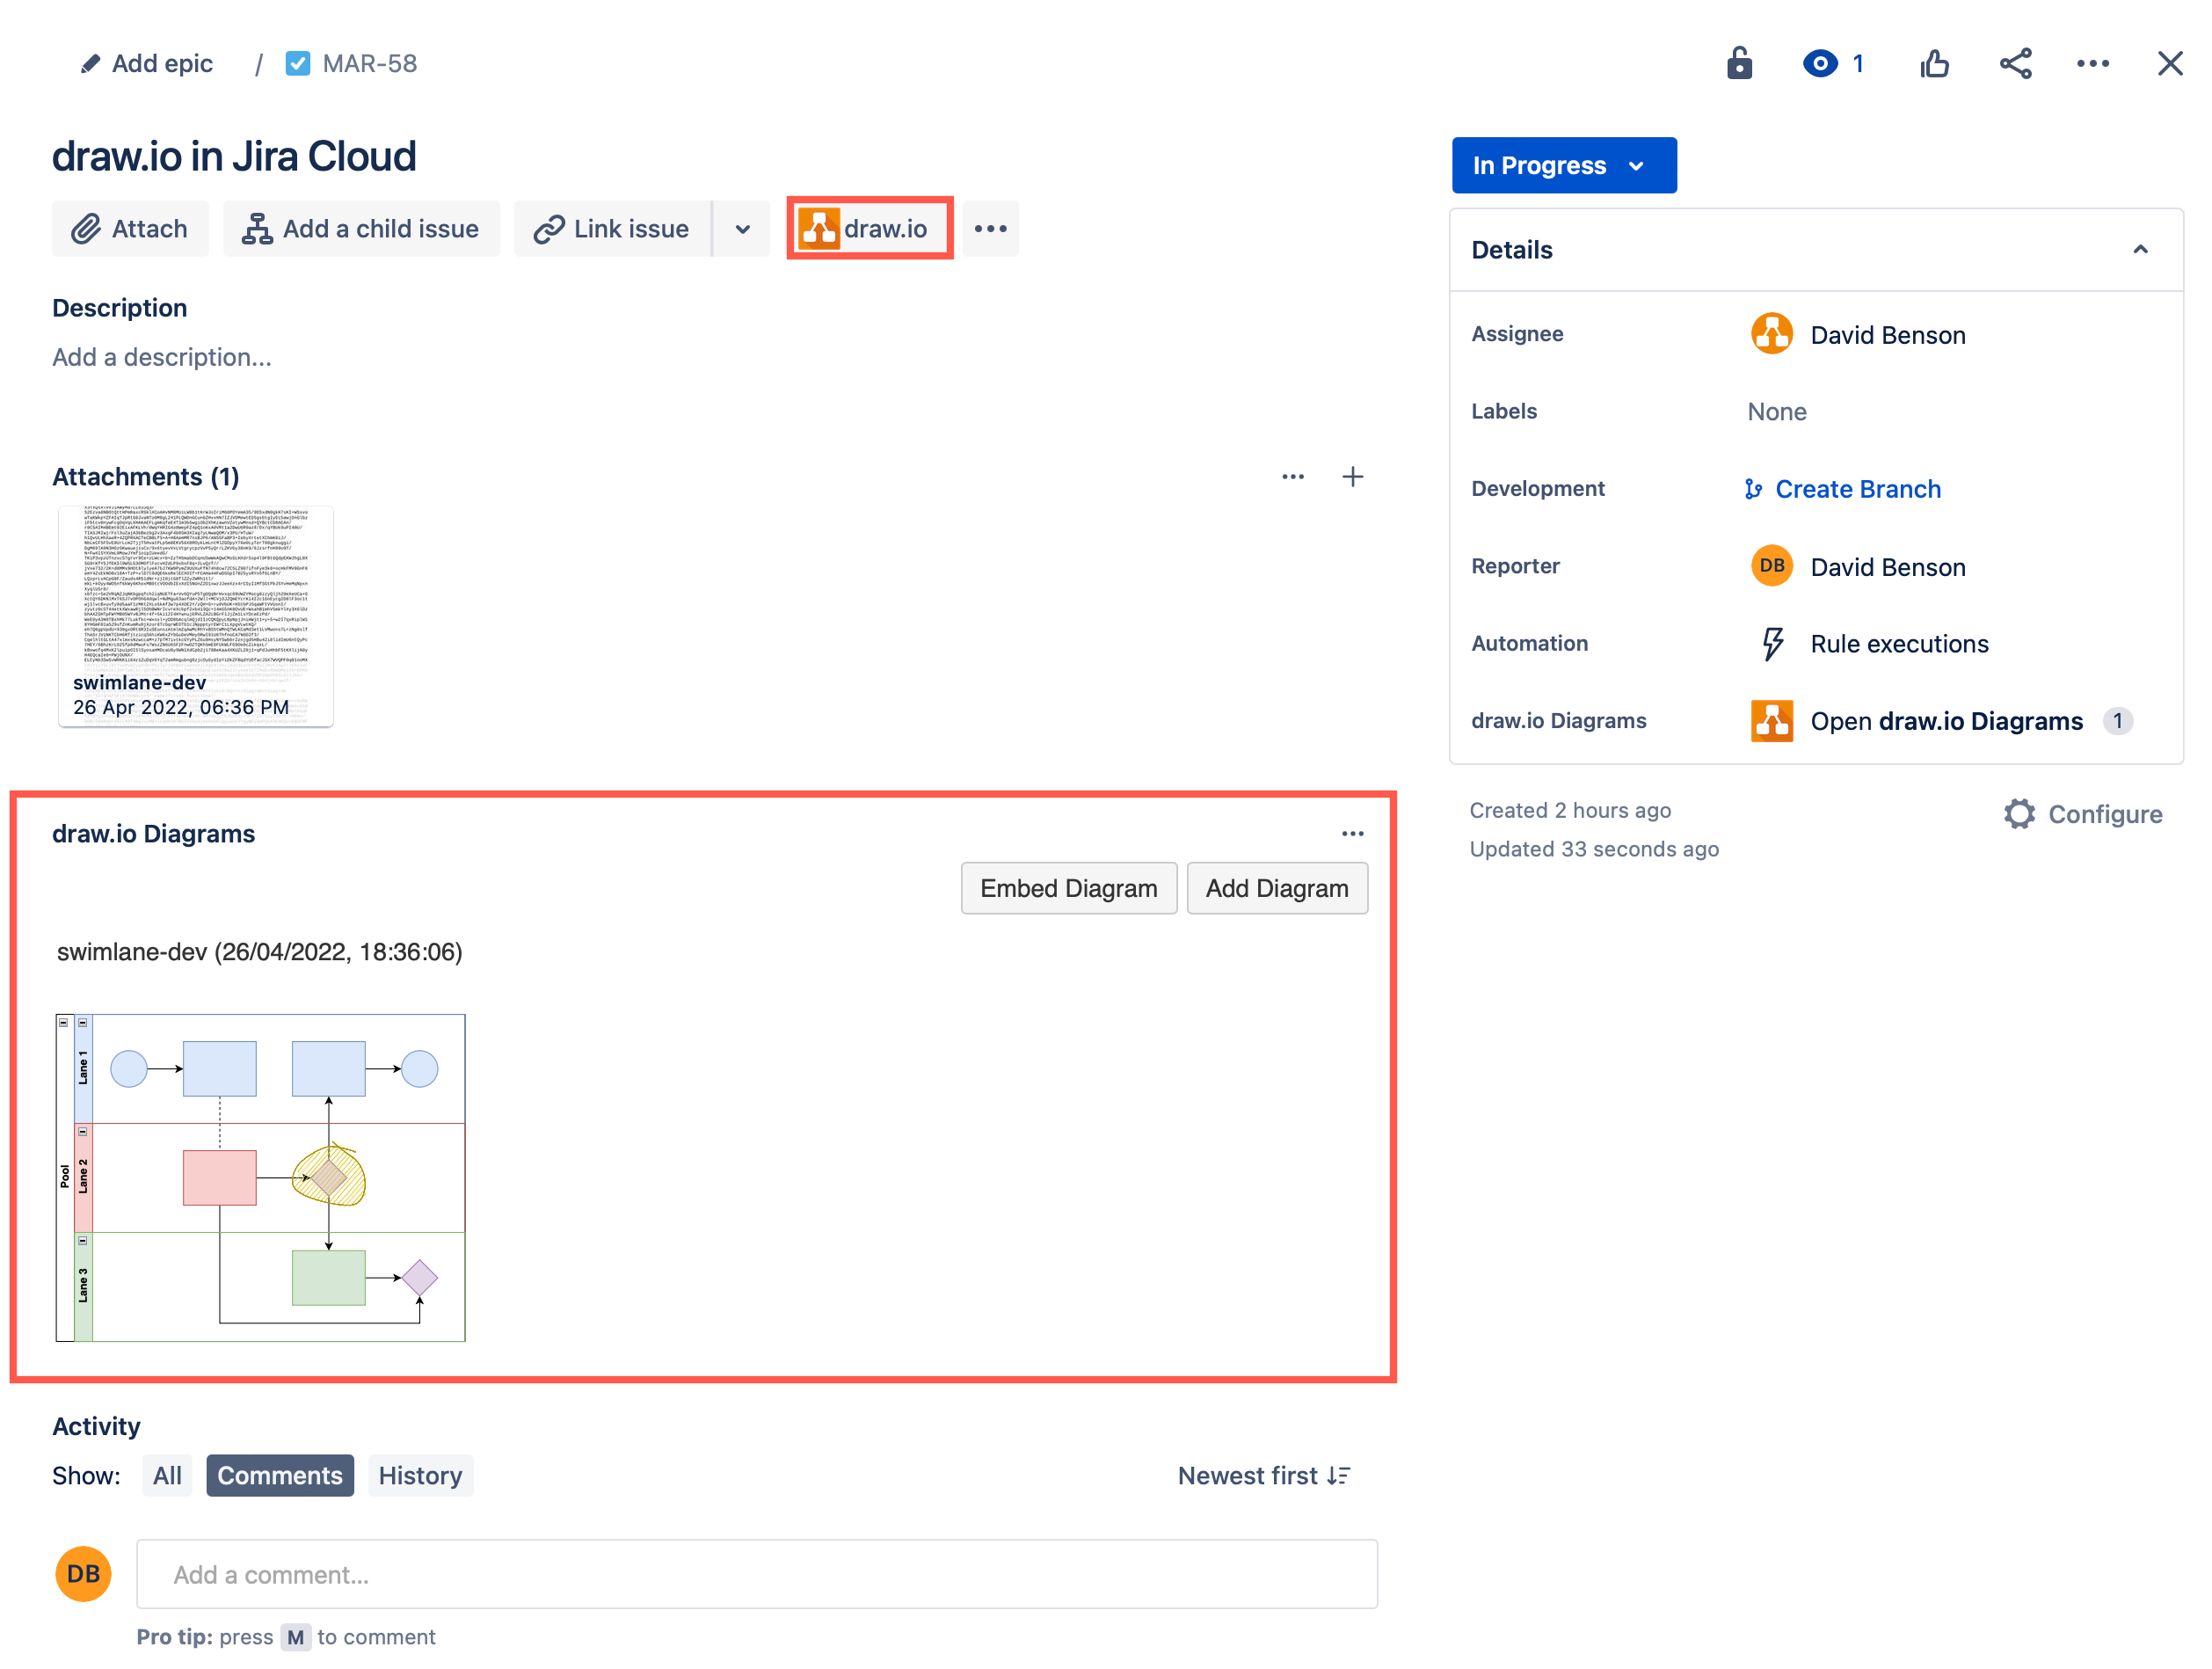 Display the draw.io diagrams section in your Jira Cloud tickets